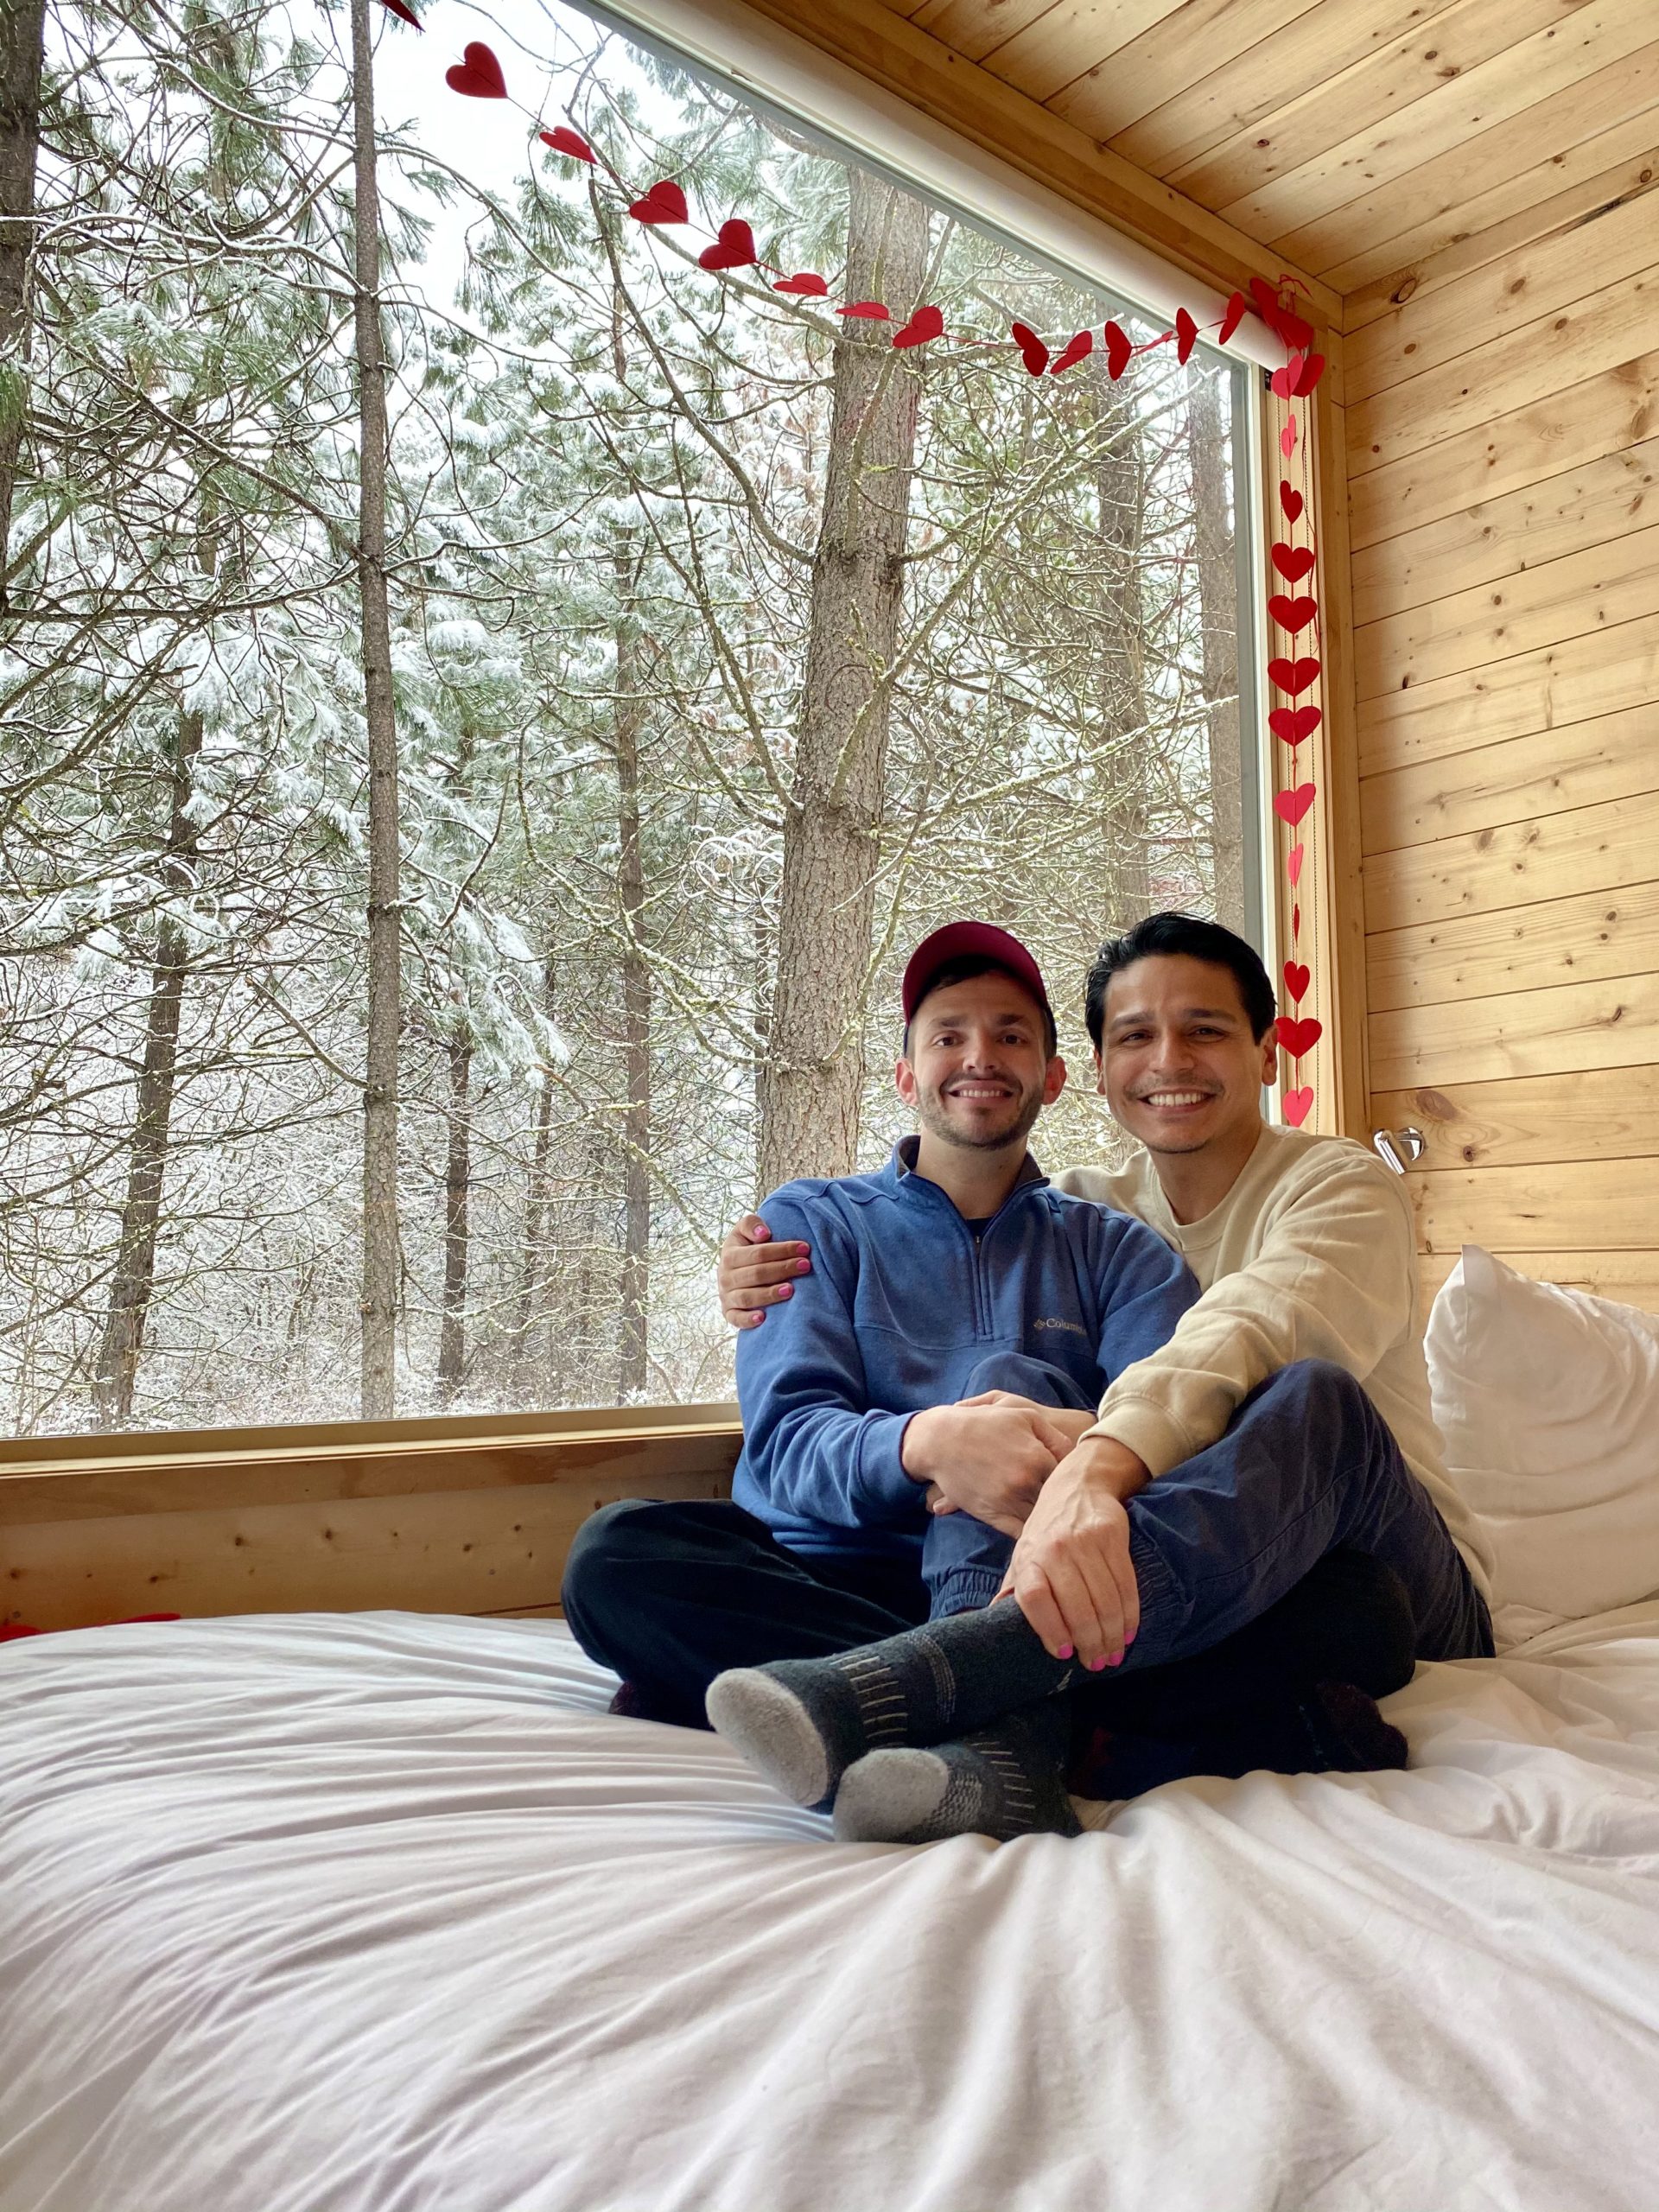 Featured Guests: A Romantic Escape with Joshua and Trent